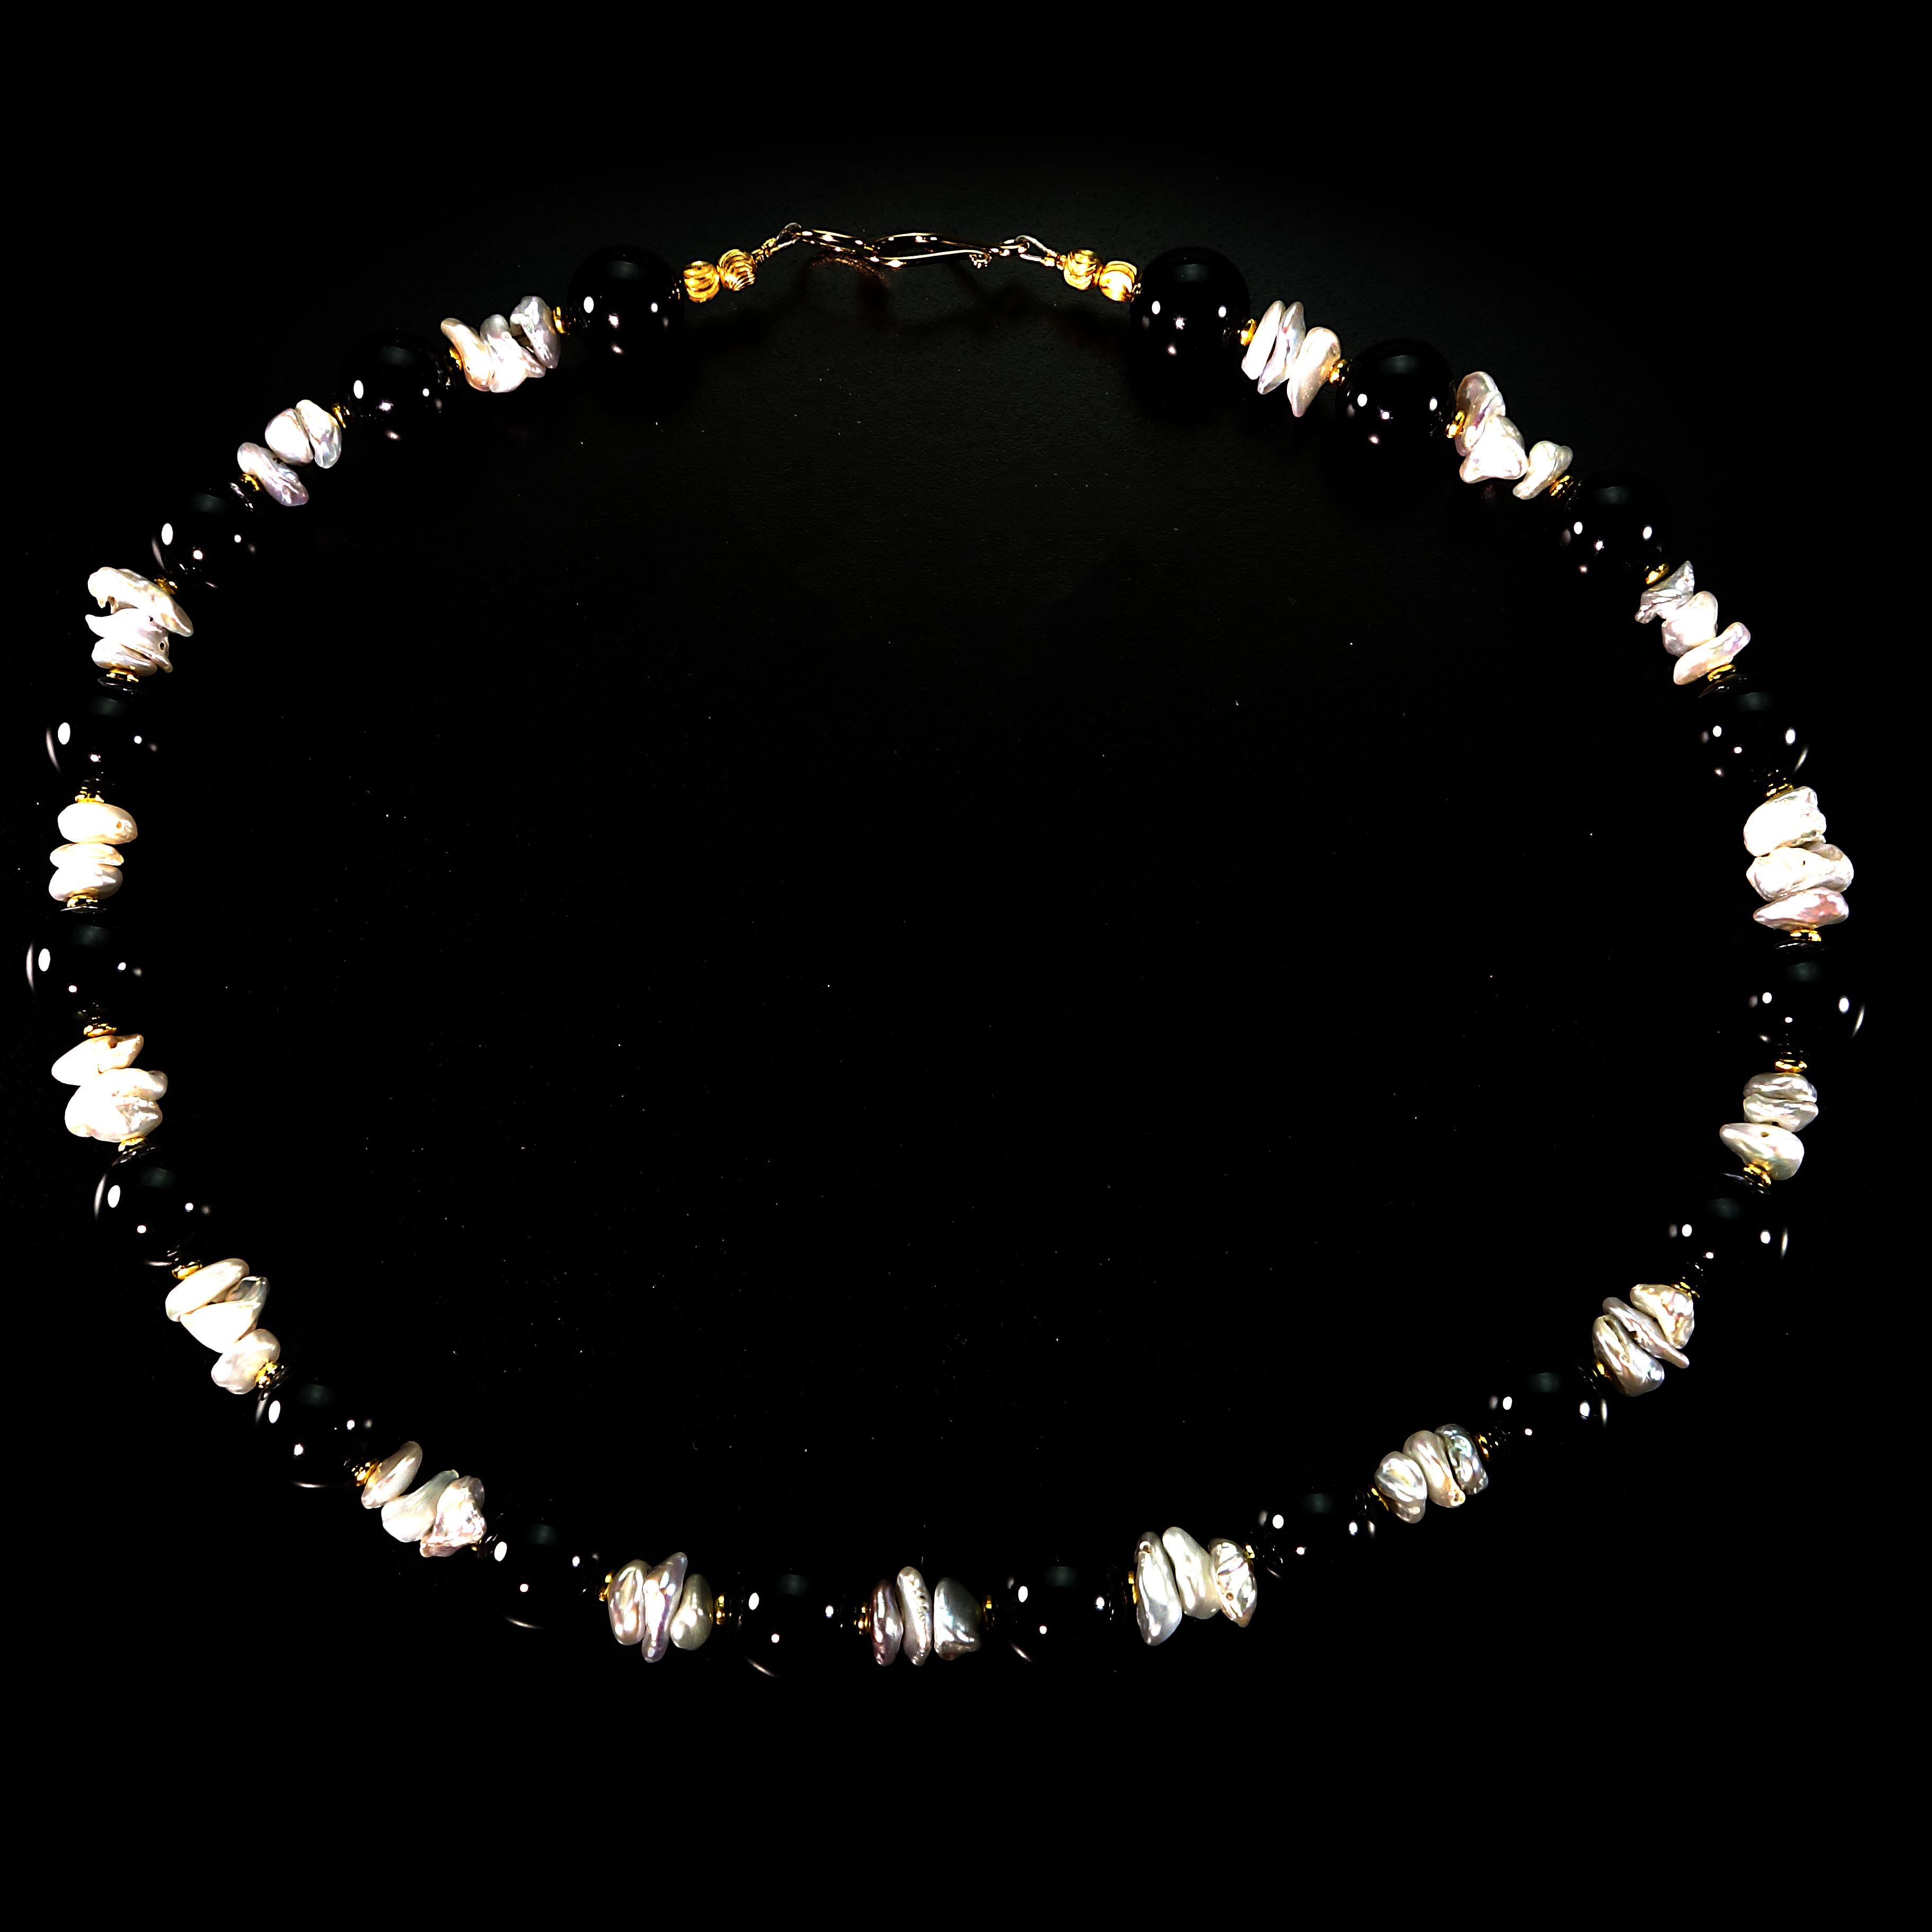 Artisan AJD Elegant Black Onyx and White Pearl Necklace June Birthstone  Great Gift!! For Sale